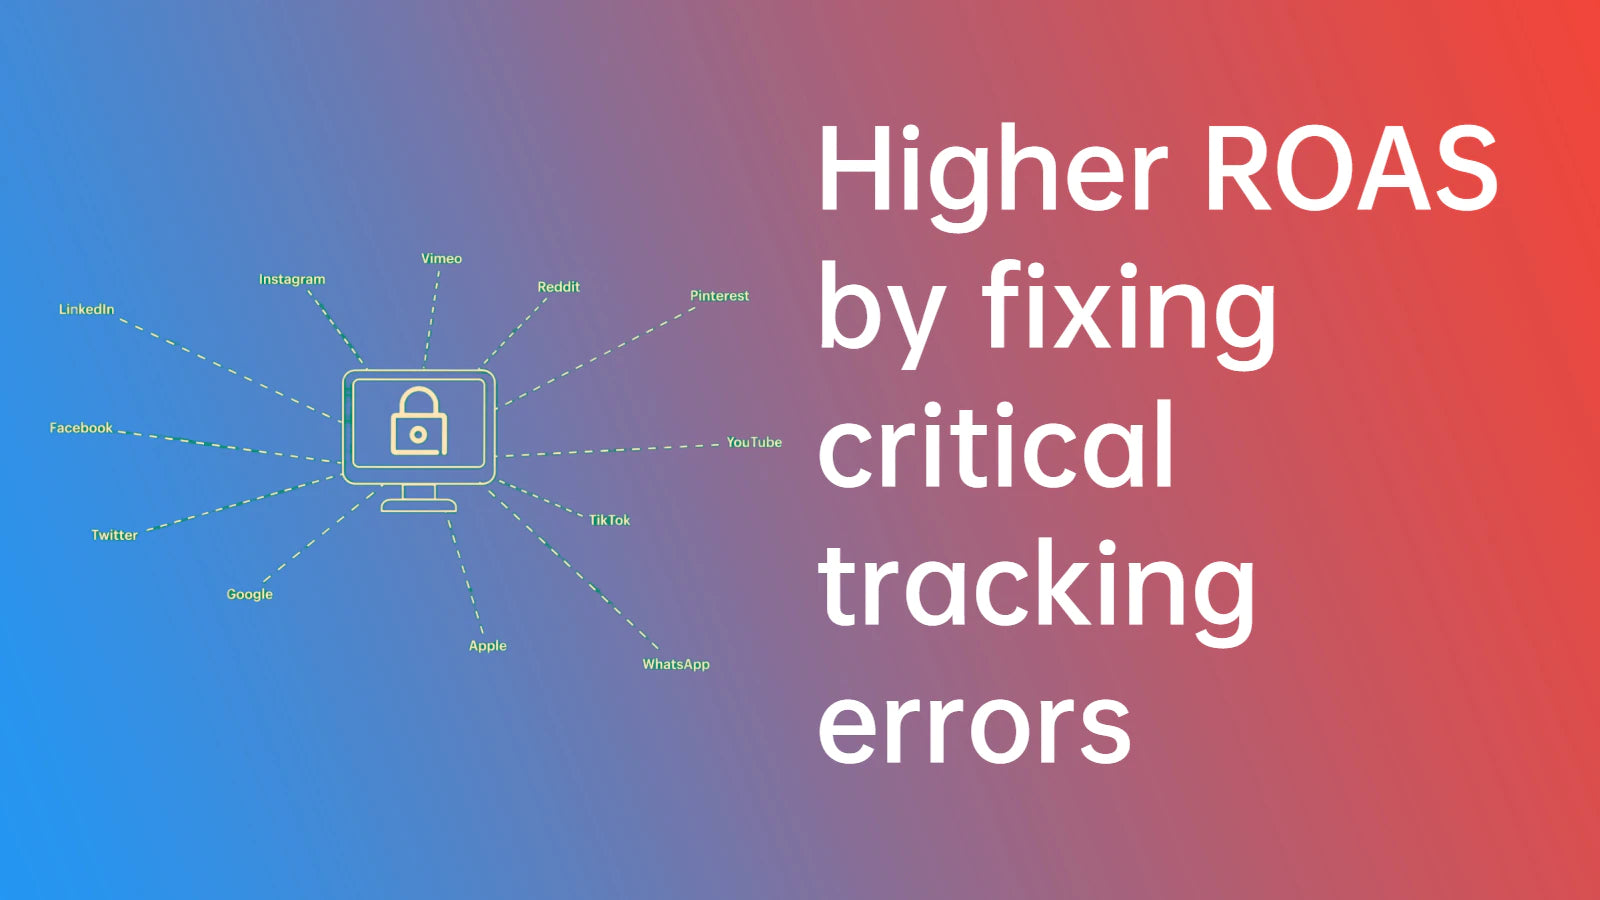 Attribuly Marketing Analytics you can have higer ROAS by fixing critical tracking errors